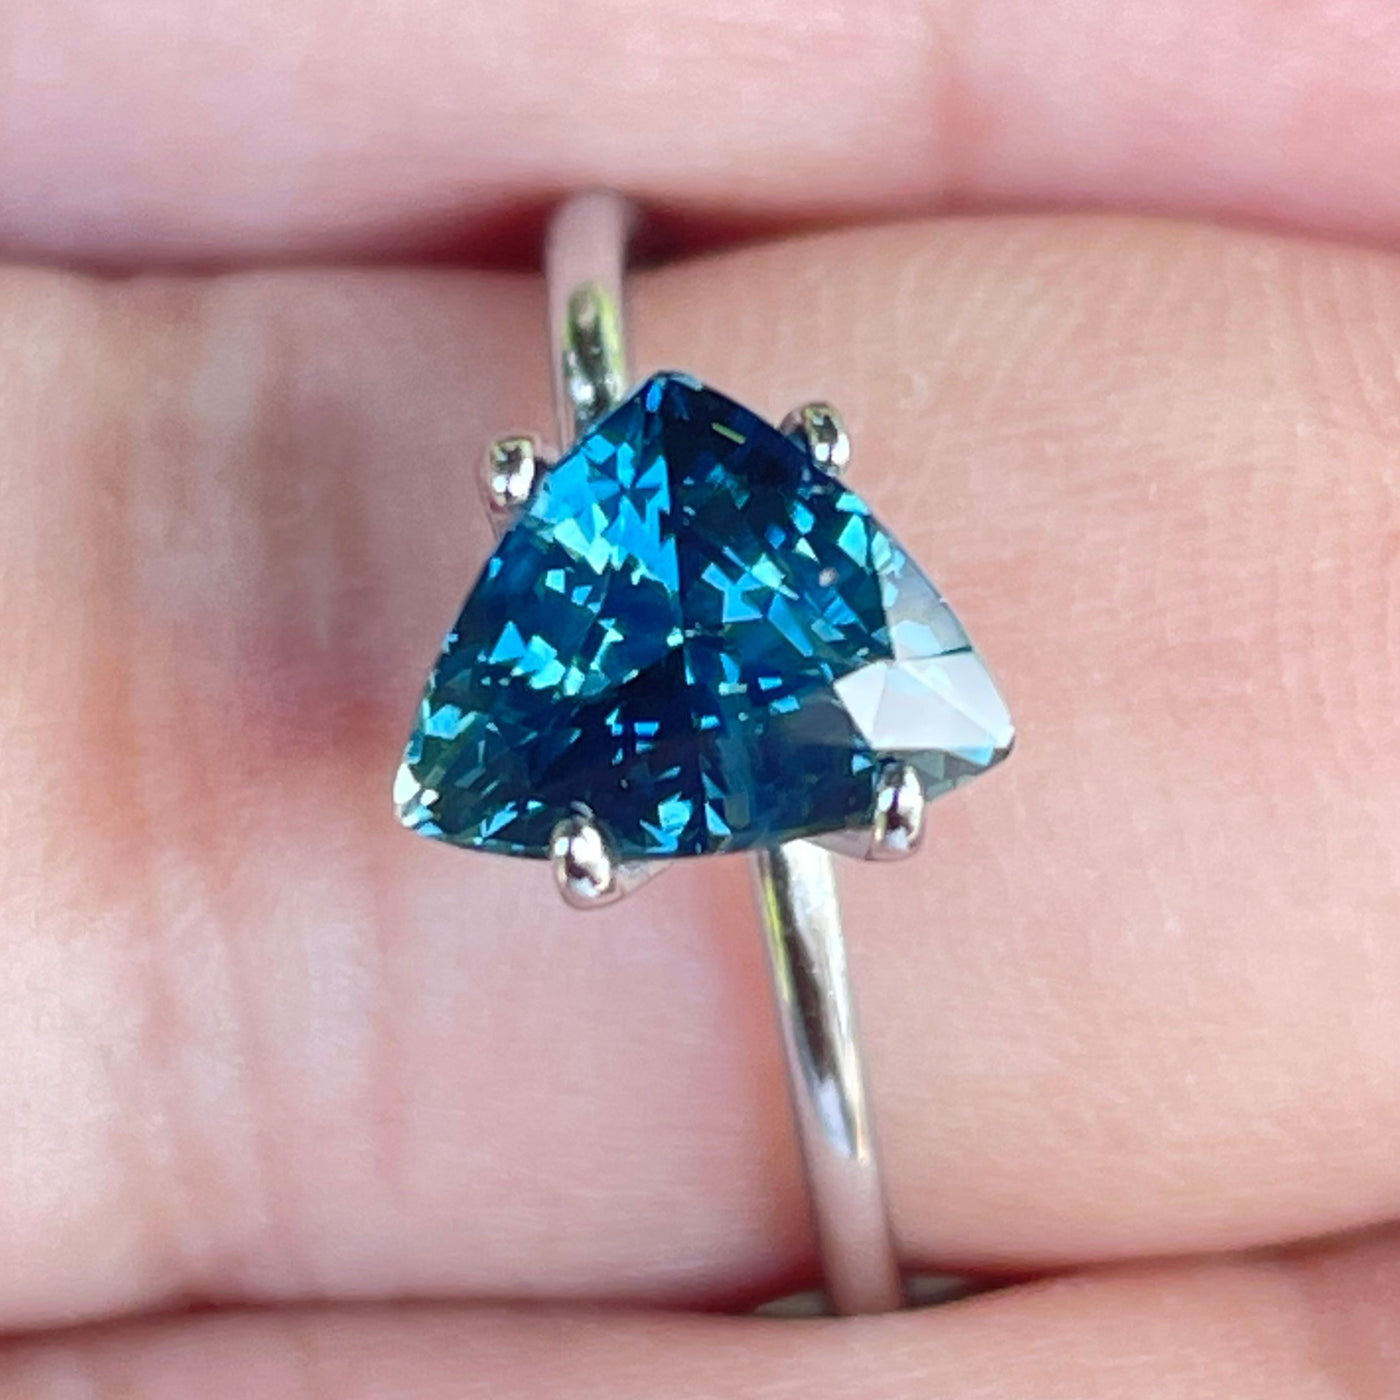 TEAL SAPPHIRE 2.08 CT